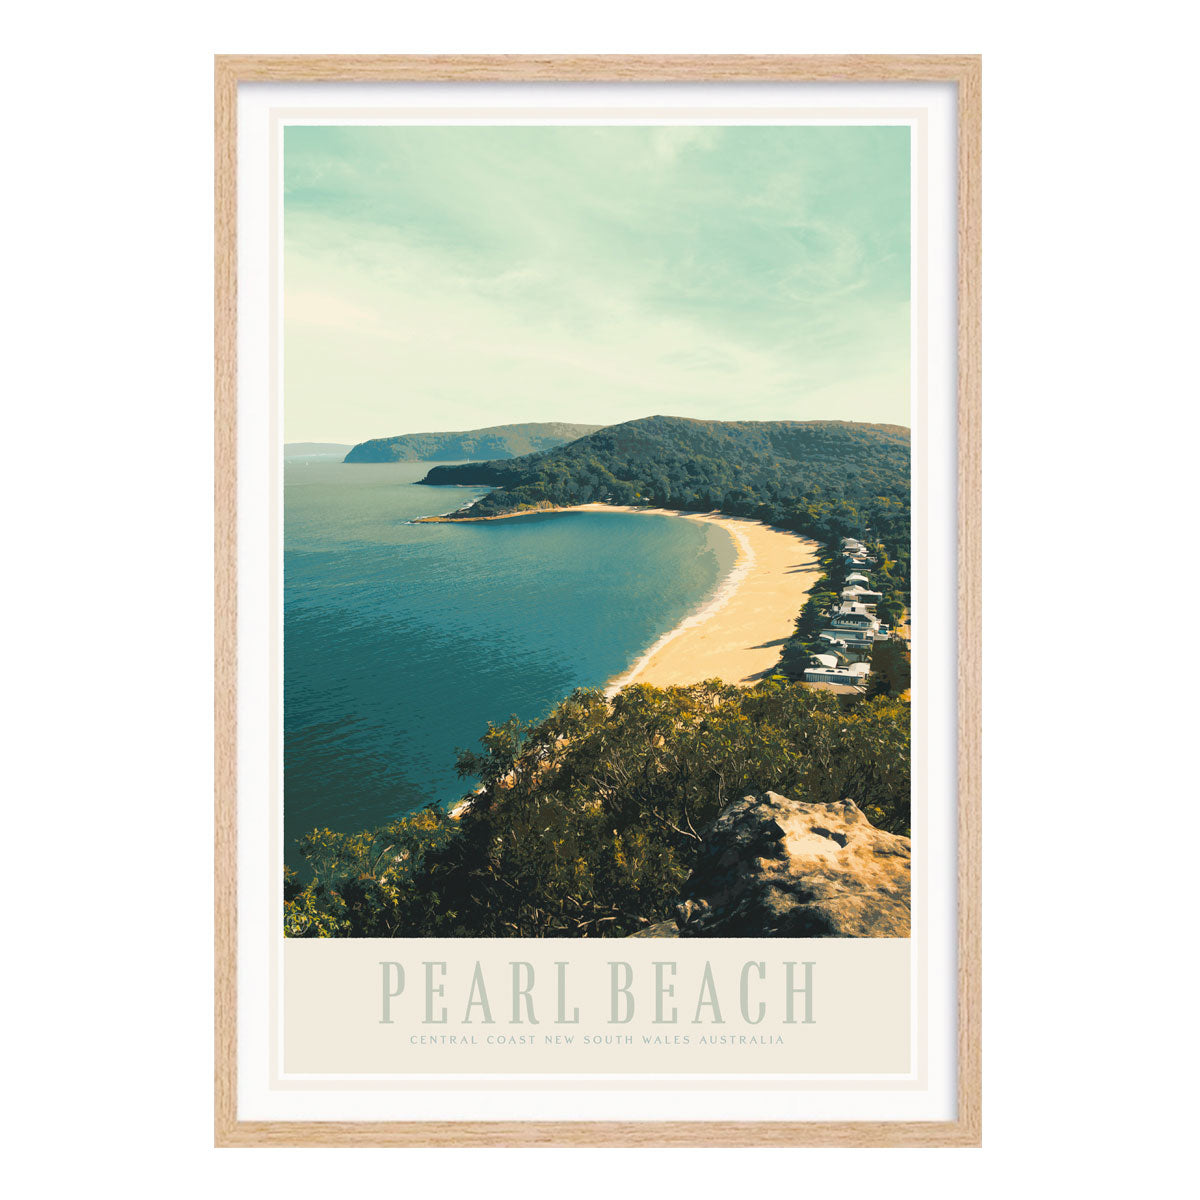 Pearl beach vintage travel poster central coast in oak frame by places we luv